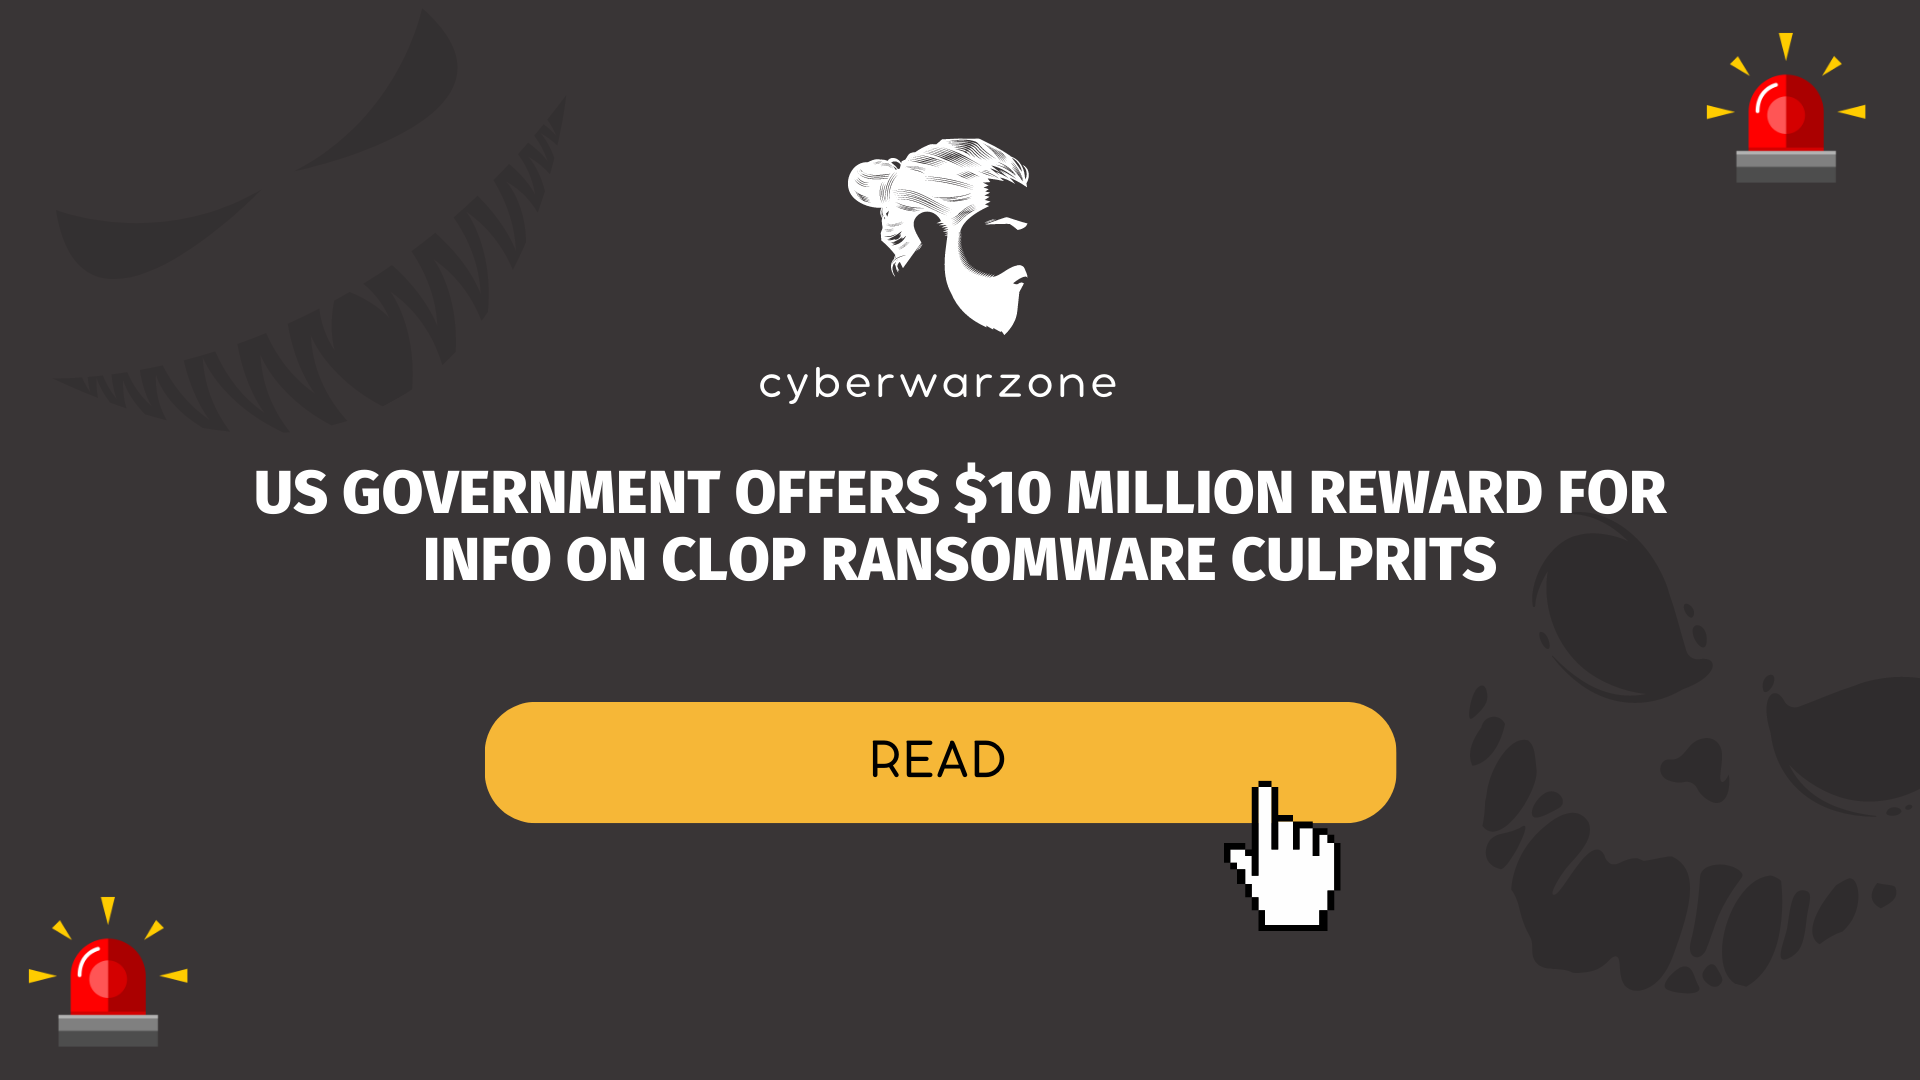 US Government Offers $10 Million Reward for Info on Clop Ransomware Culprits